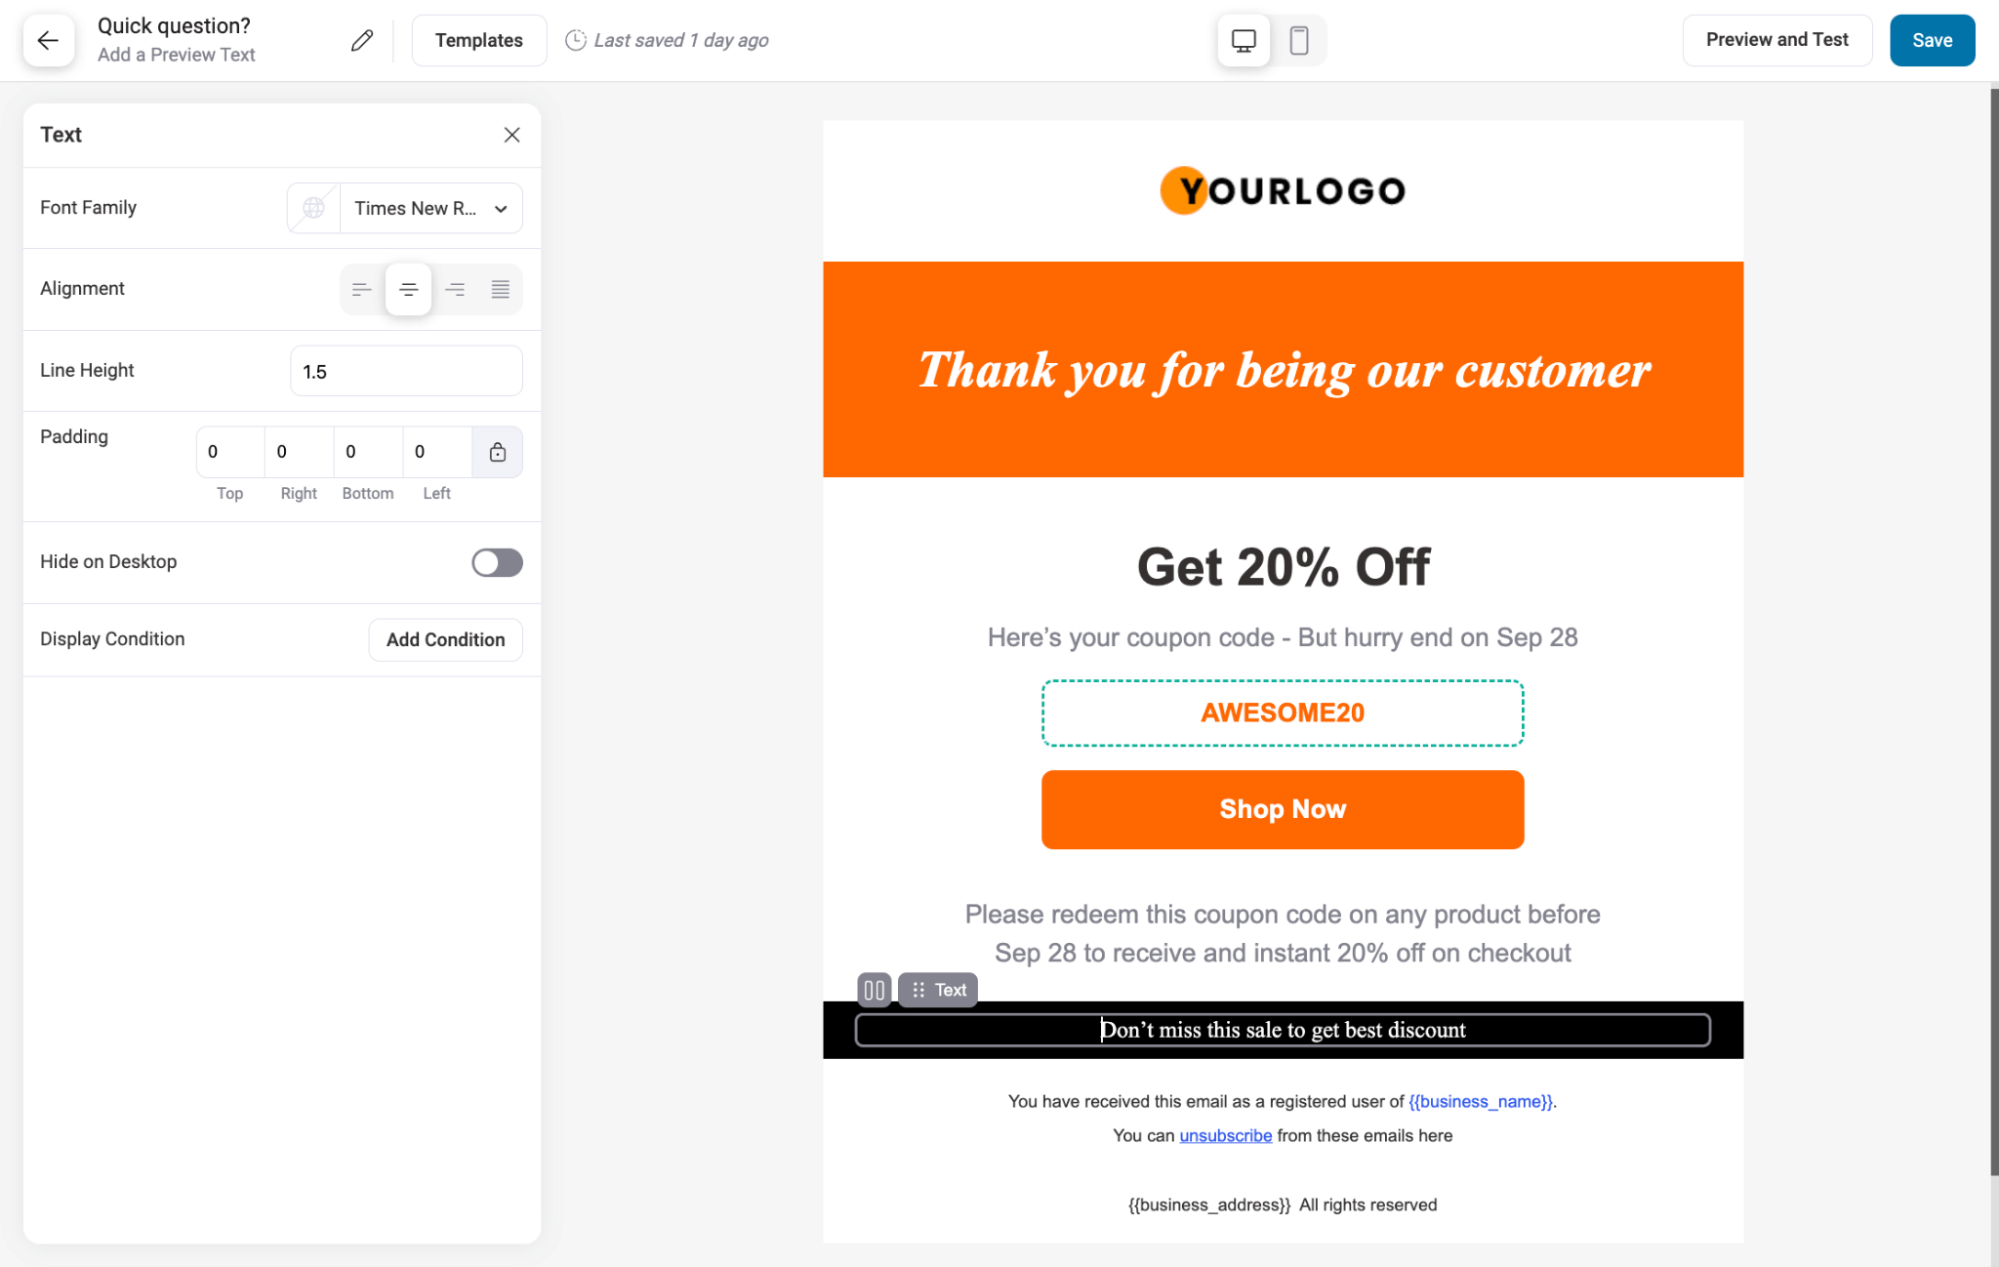 offer discount in one of the email in drip campaign